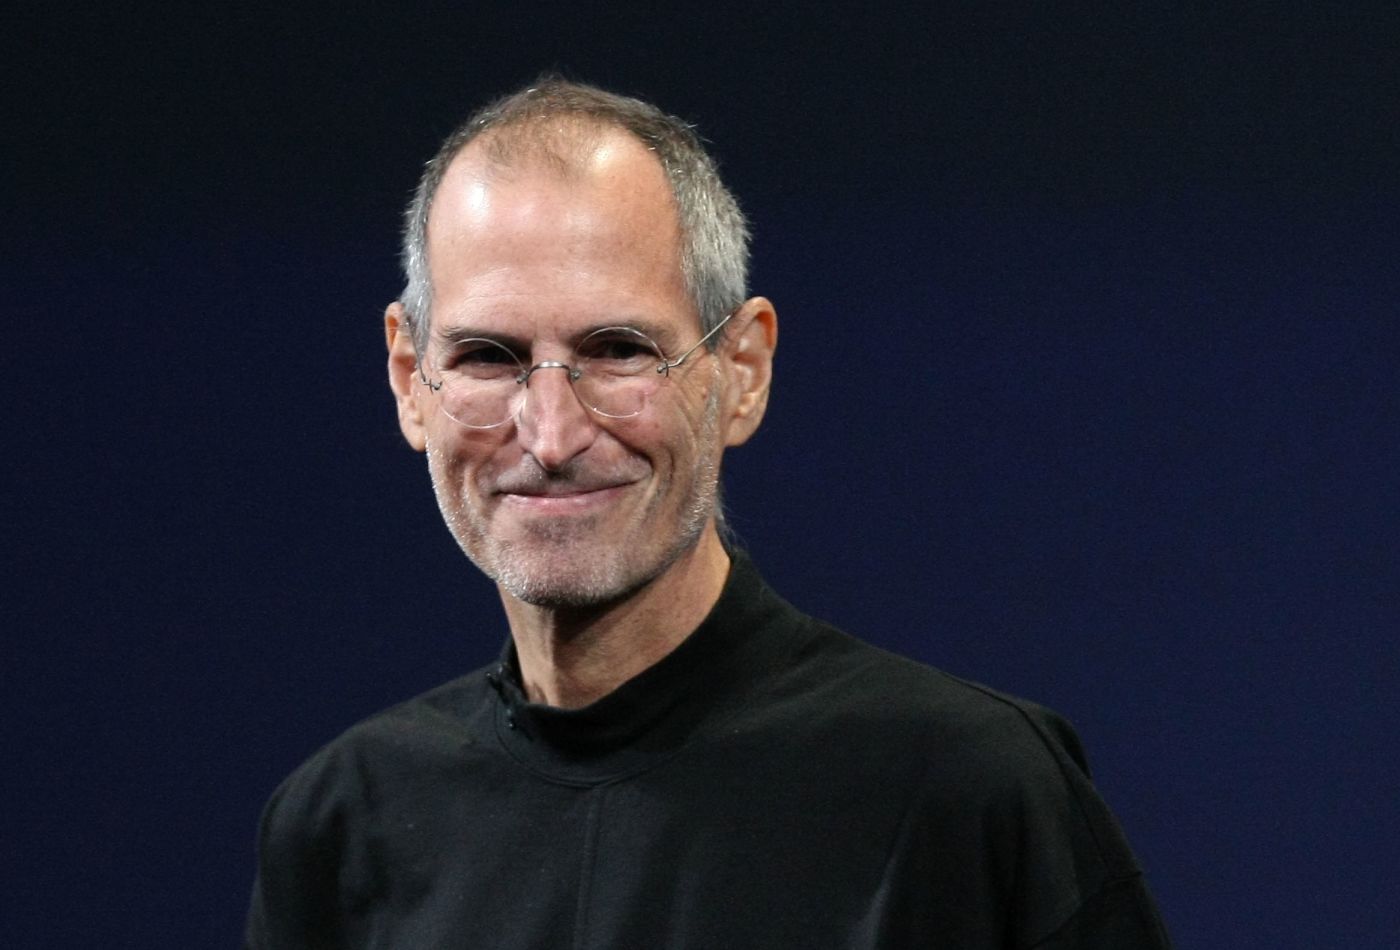 You’ve Got 15 Questions to Prove You’re More Knowledgeable Than the Average Person Steve Jobs